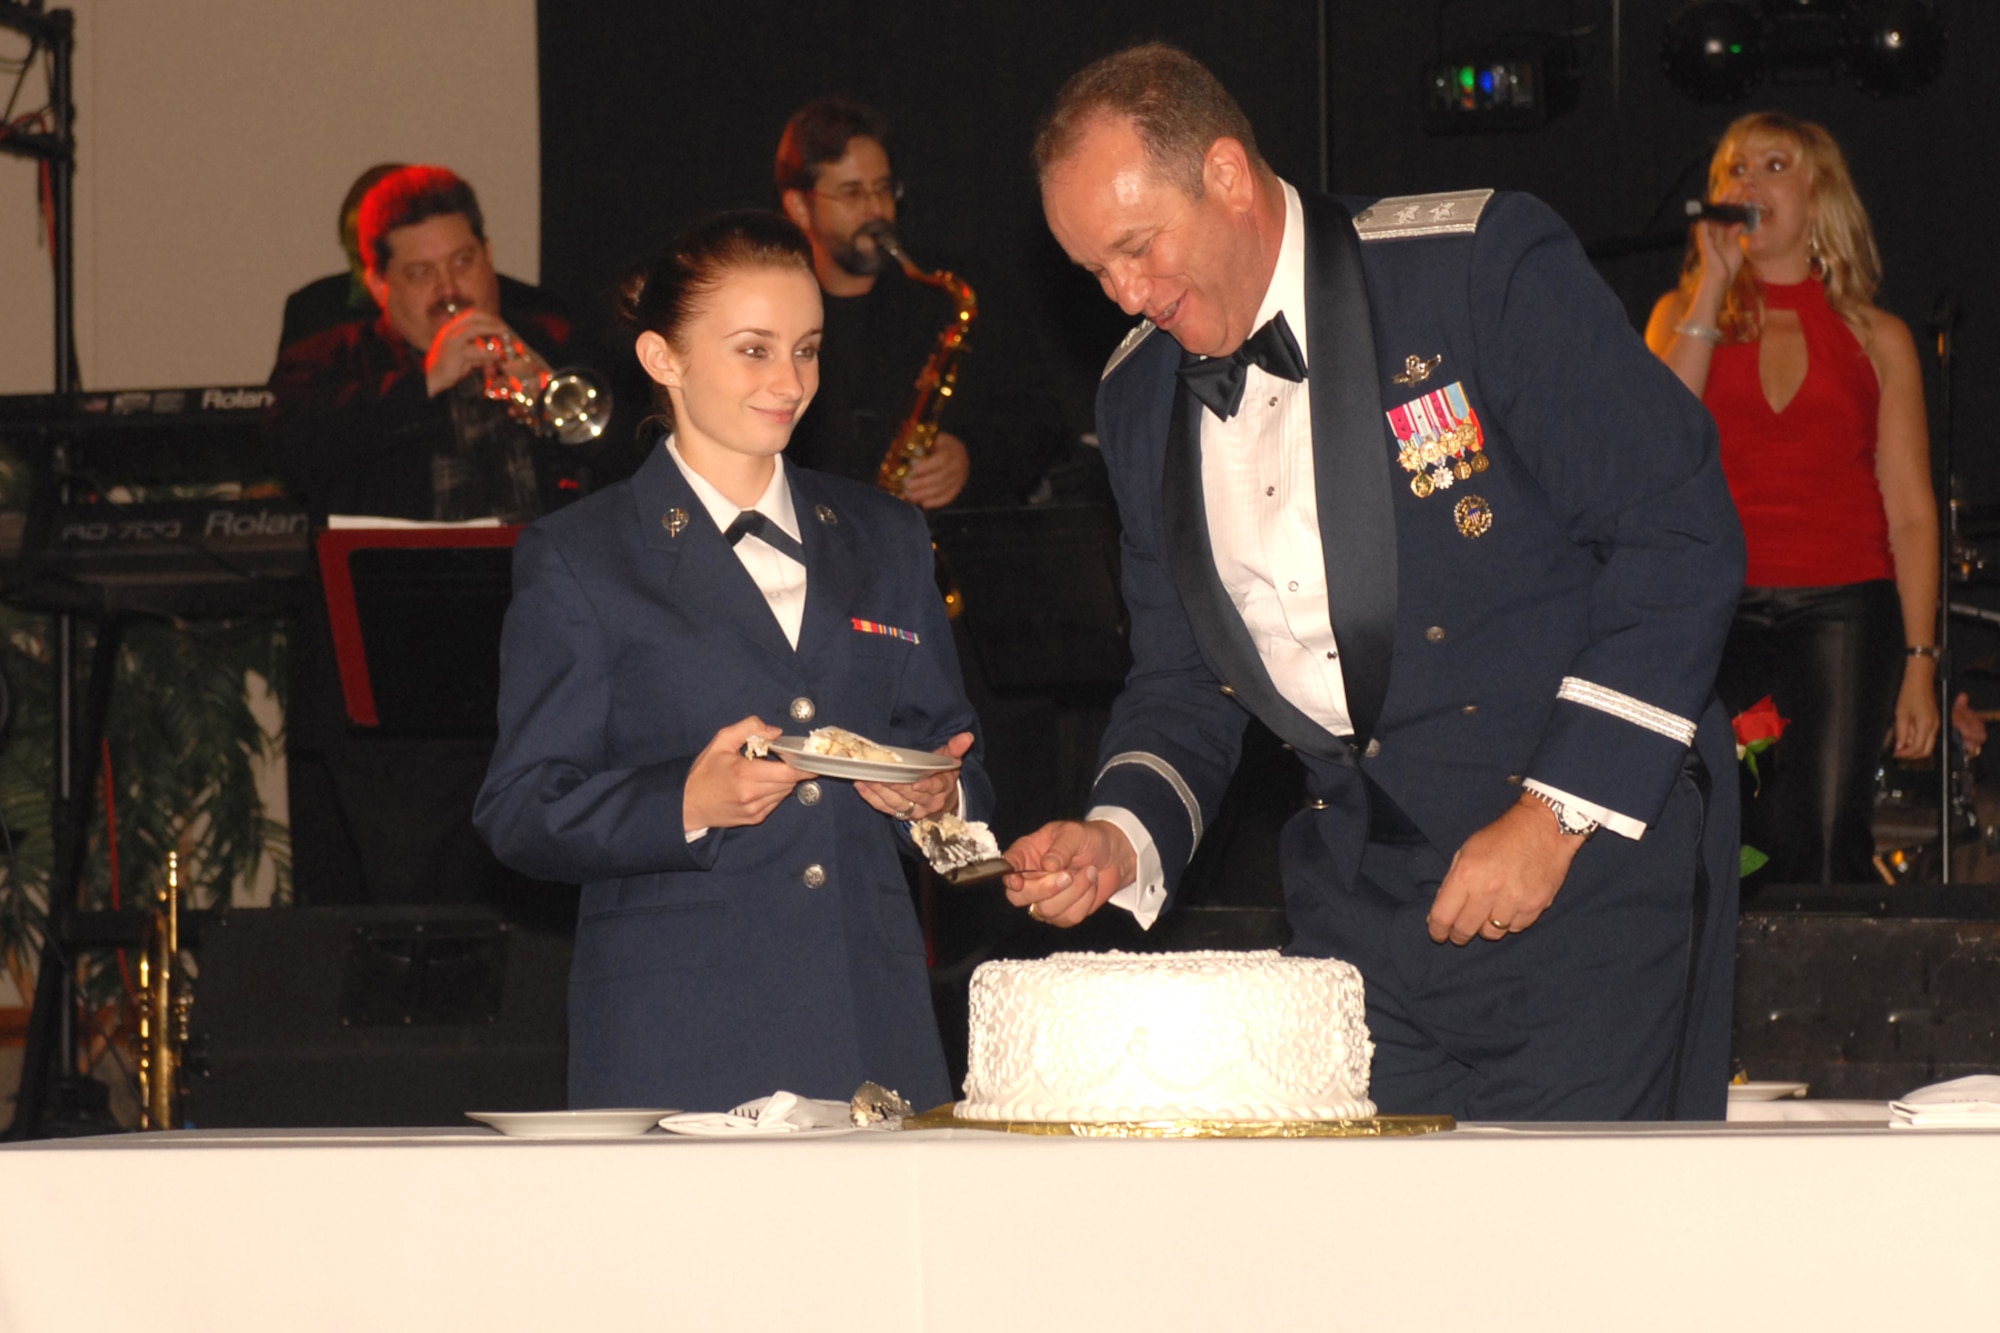 Maj. Gen. Philip Breedlove, Pentagon Strategic Plans and Policy vice director,
and Airman Basic Kaitlyn Rollis, 56th Operations Support Squadron air traffic
controller, perform the cake cutting ceremony at the Air Force Ball Saturday at
the Glendale Civic Center. It is Air Force tradition for the most senior and junior
members to participate in this ceremony to mark the beginning of the evening’s
festivities. See Page 19 for full story. (Photo by Tech. Sgt. Ian Dean)